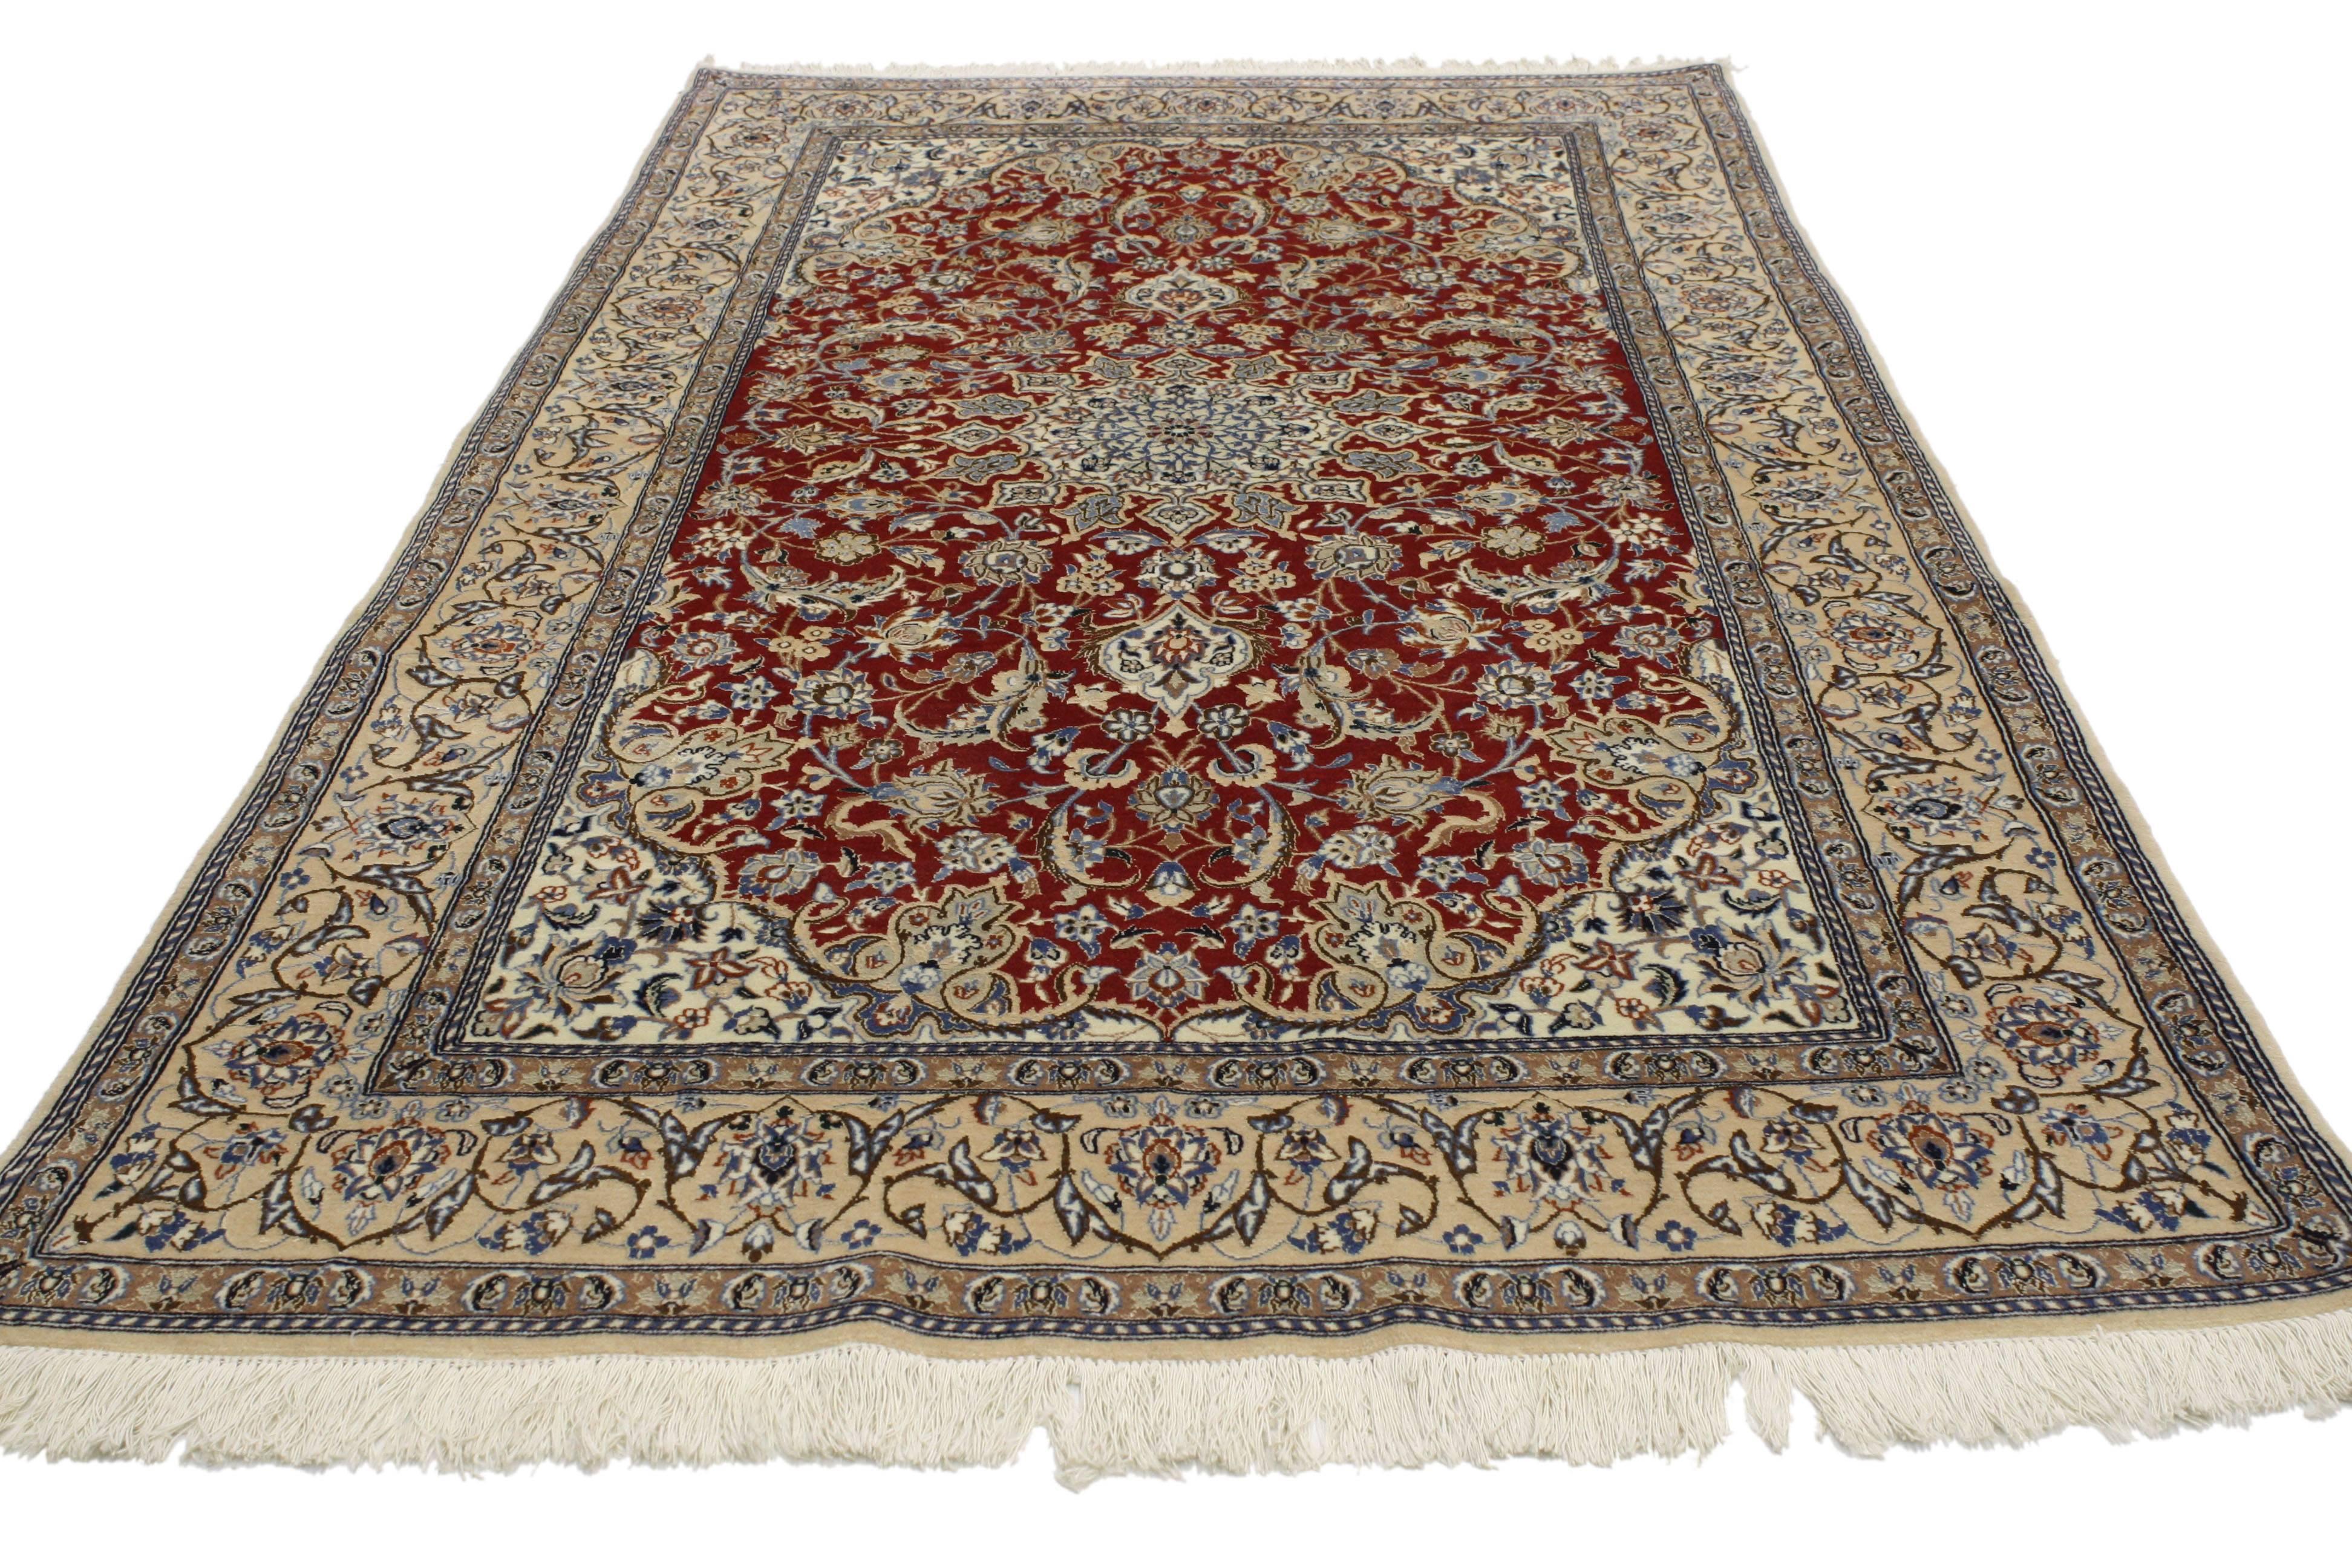 76998 Vintage Persian Nain Rug with Traditional Style. This hand-knotted wool vintage Persian Nain rug with traditional style features an ornate 16-point center medallion and breathtaking spandrels with an impressive all-over arabesque floral